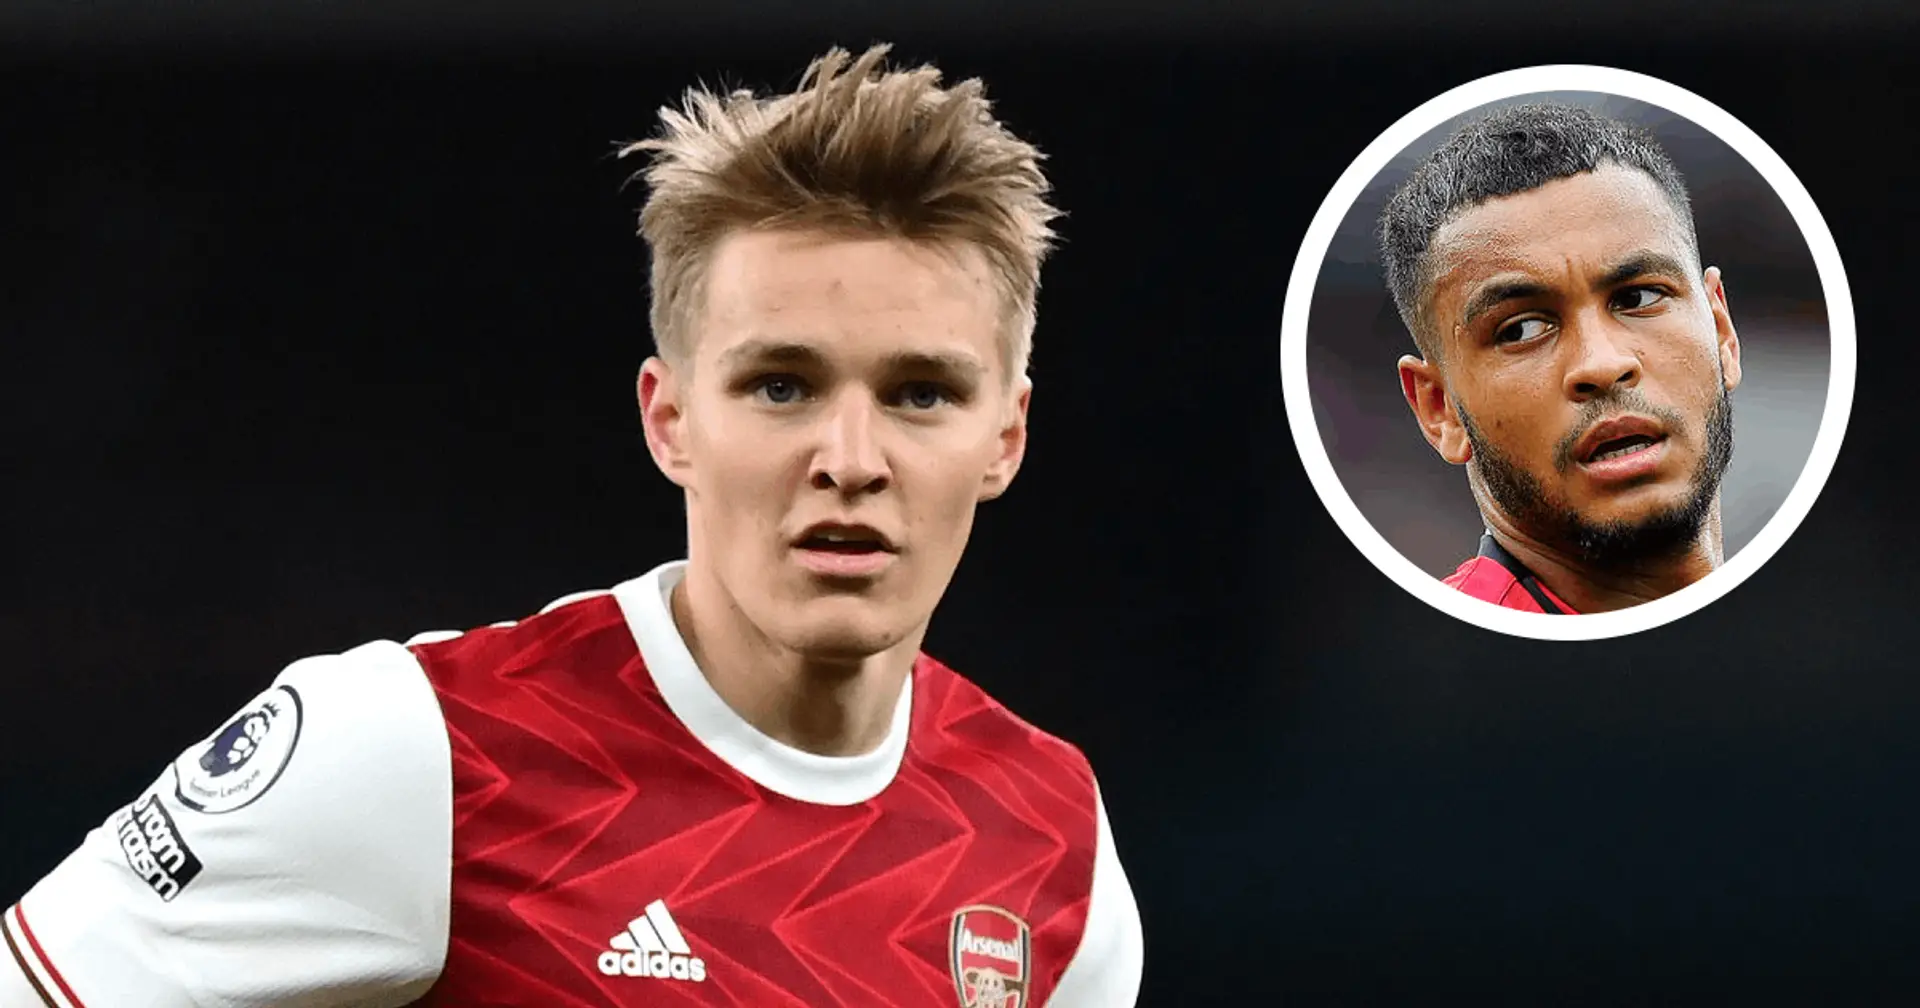 'You have to go to Arsenal': Odegaard's Norway teammate reveals he helped Martin to decide on his loan destination